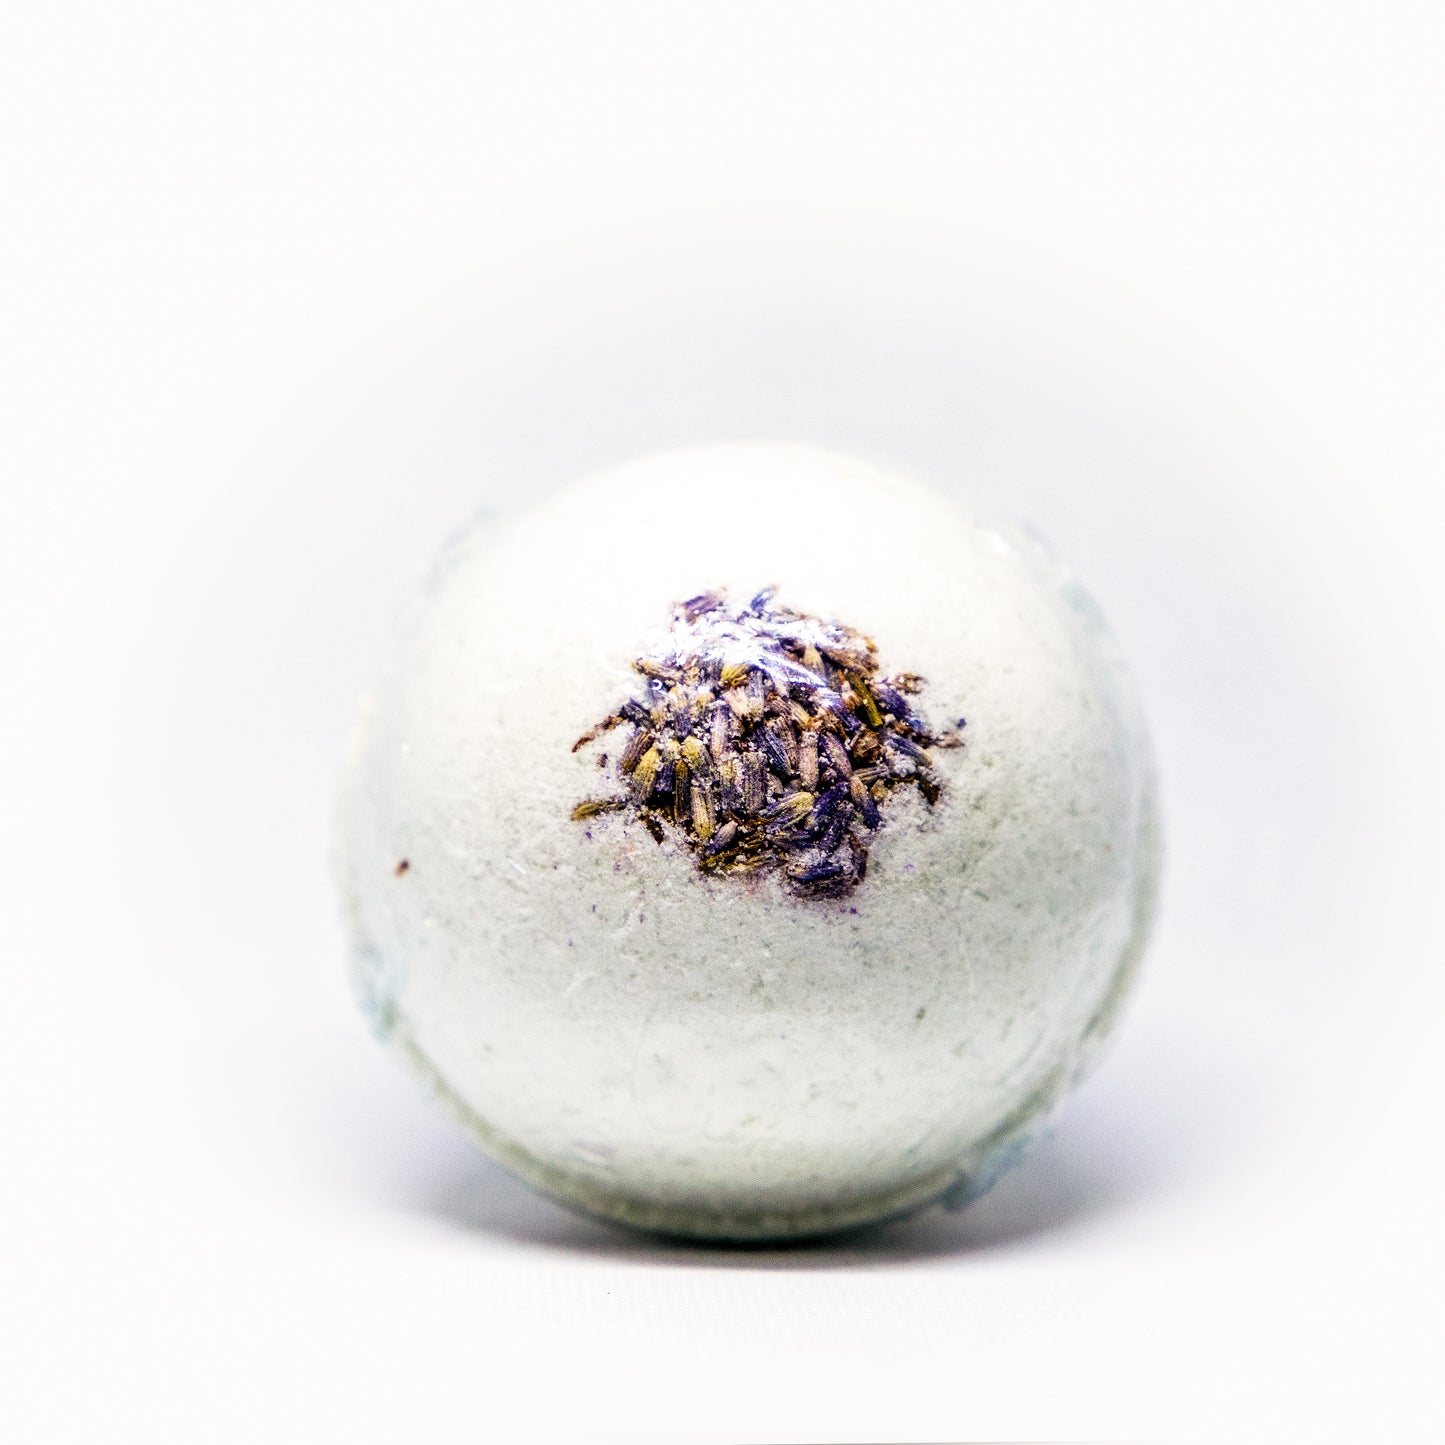 Bathbombs - Mary Turner Day Spa & Boutique